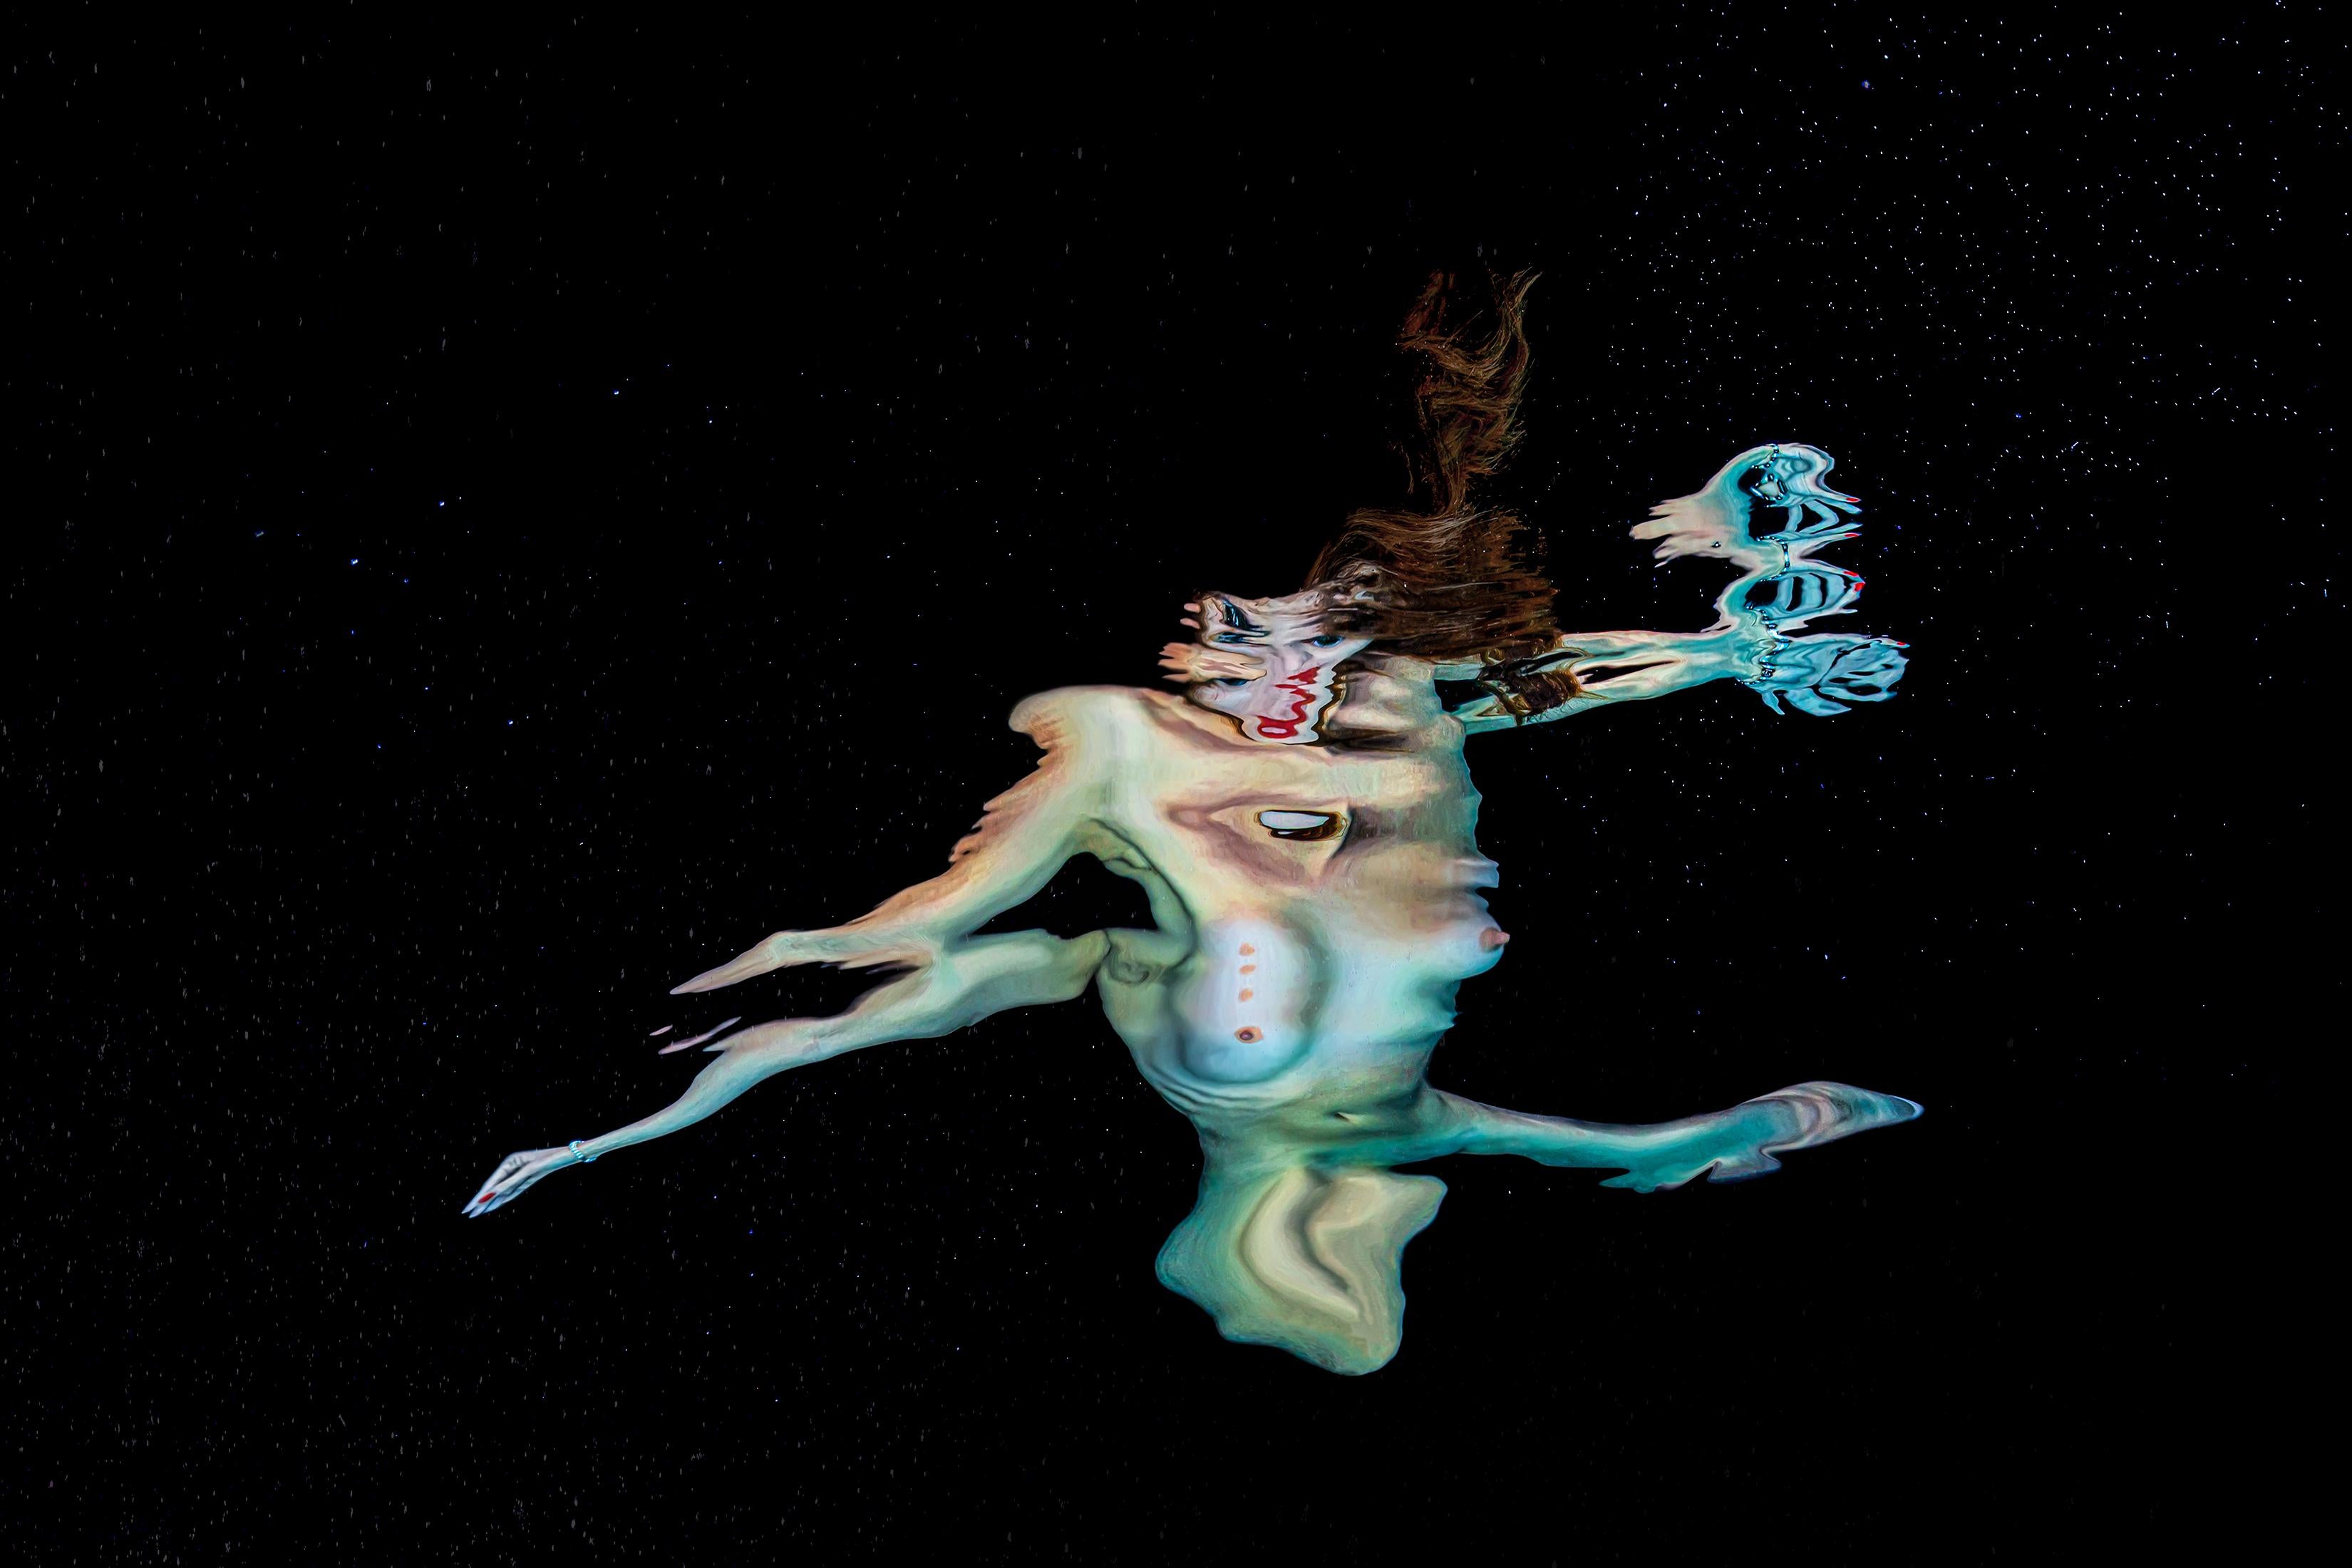 Alex Sher Nude Photograph - Capricho - underwater nude photograph from series REFLECTIONS - acrylic 32 x 48"